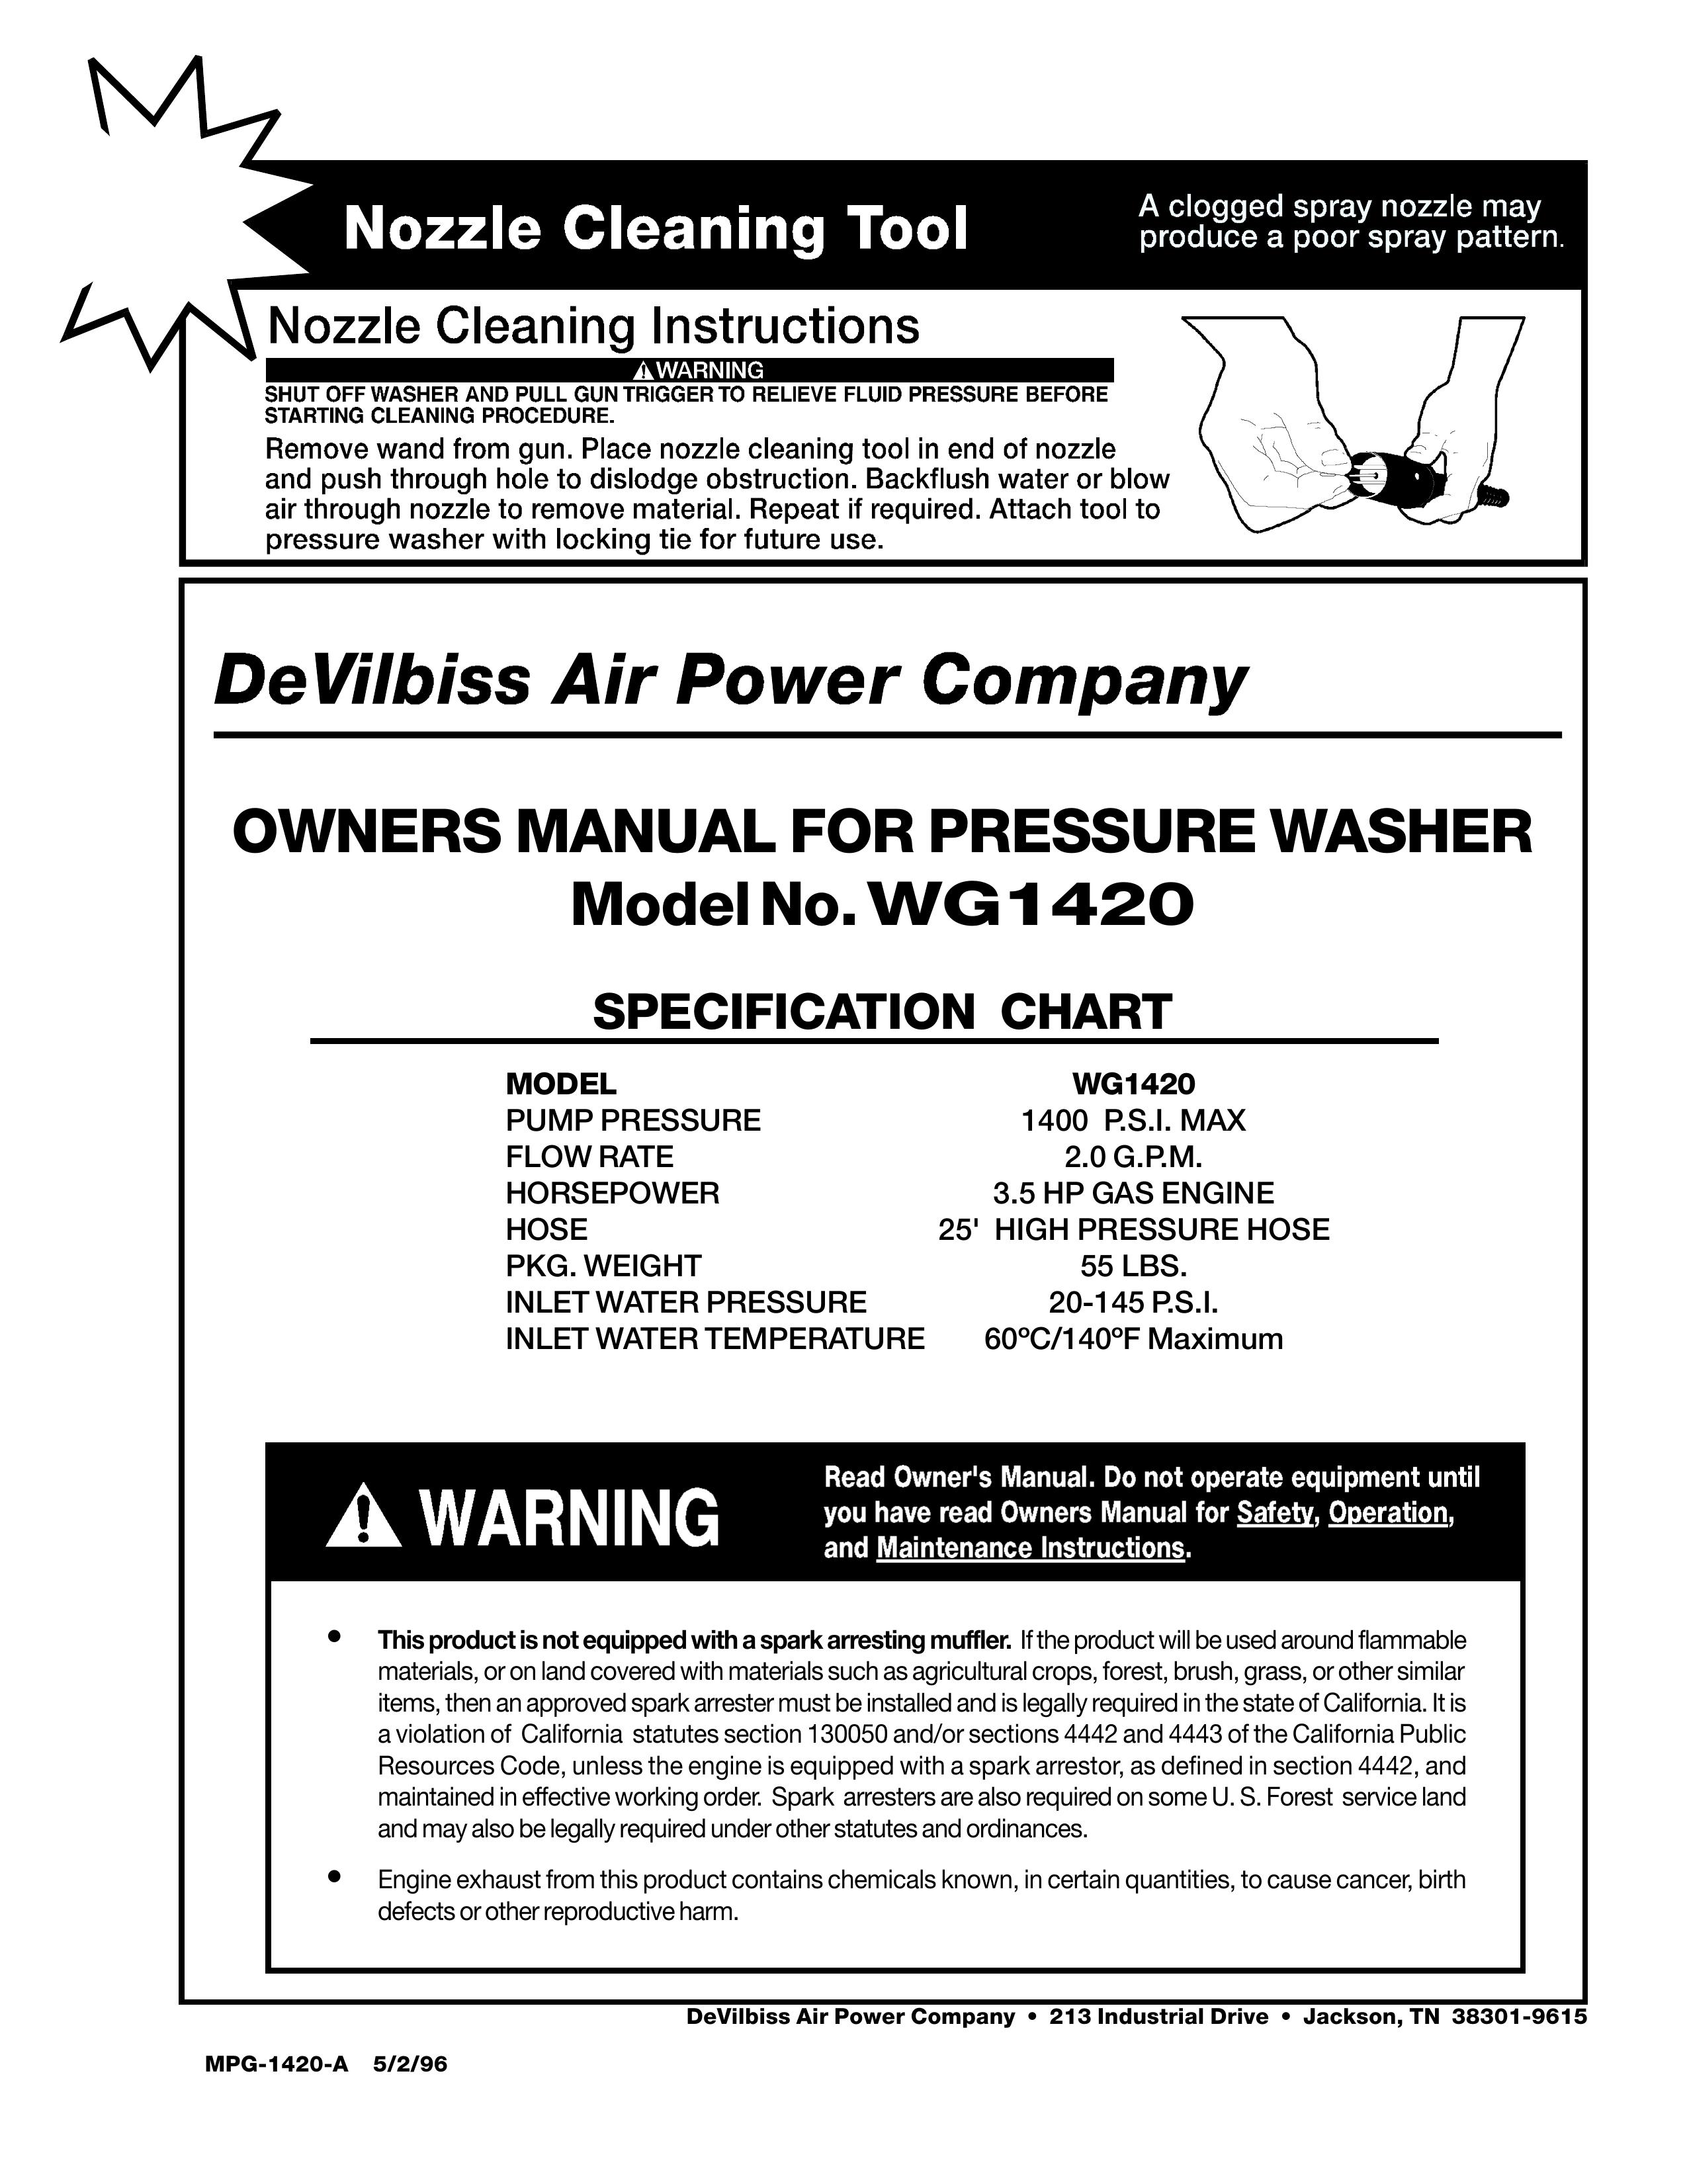 DeVillbiss Air Power Company MPG-1420-A Pressure Washer User Manual